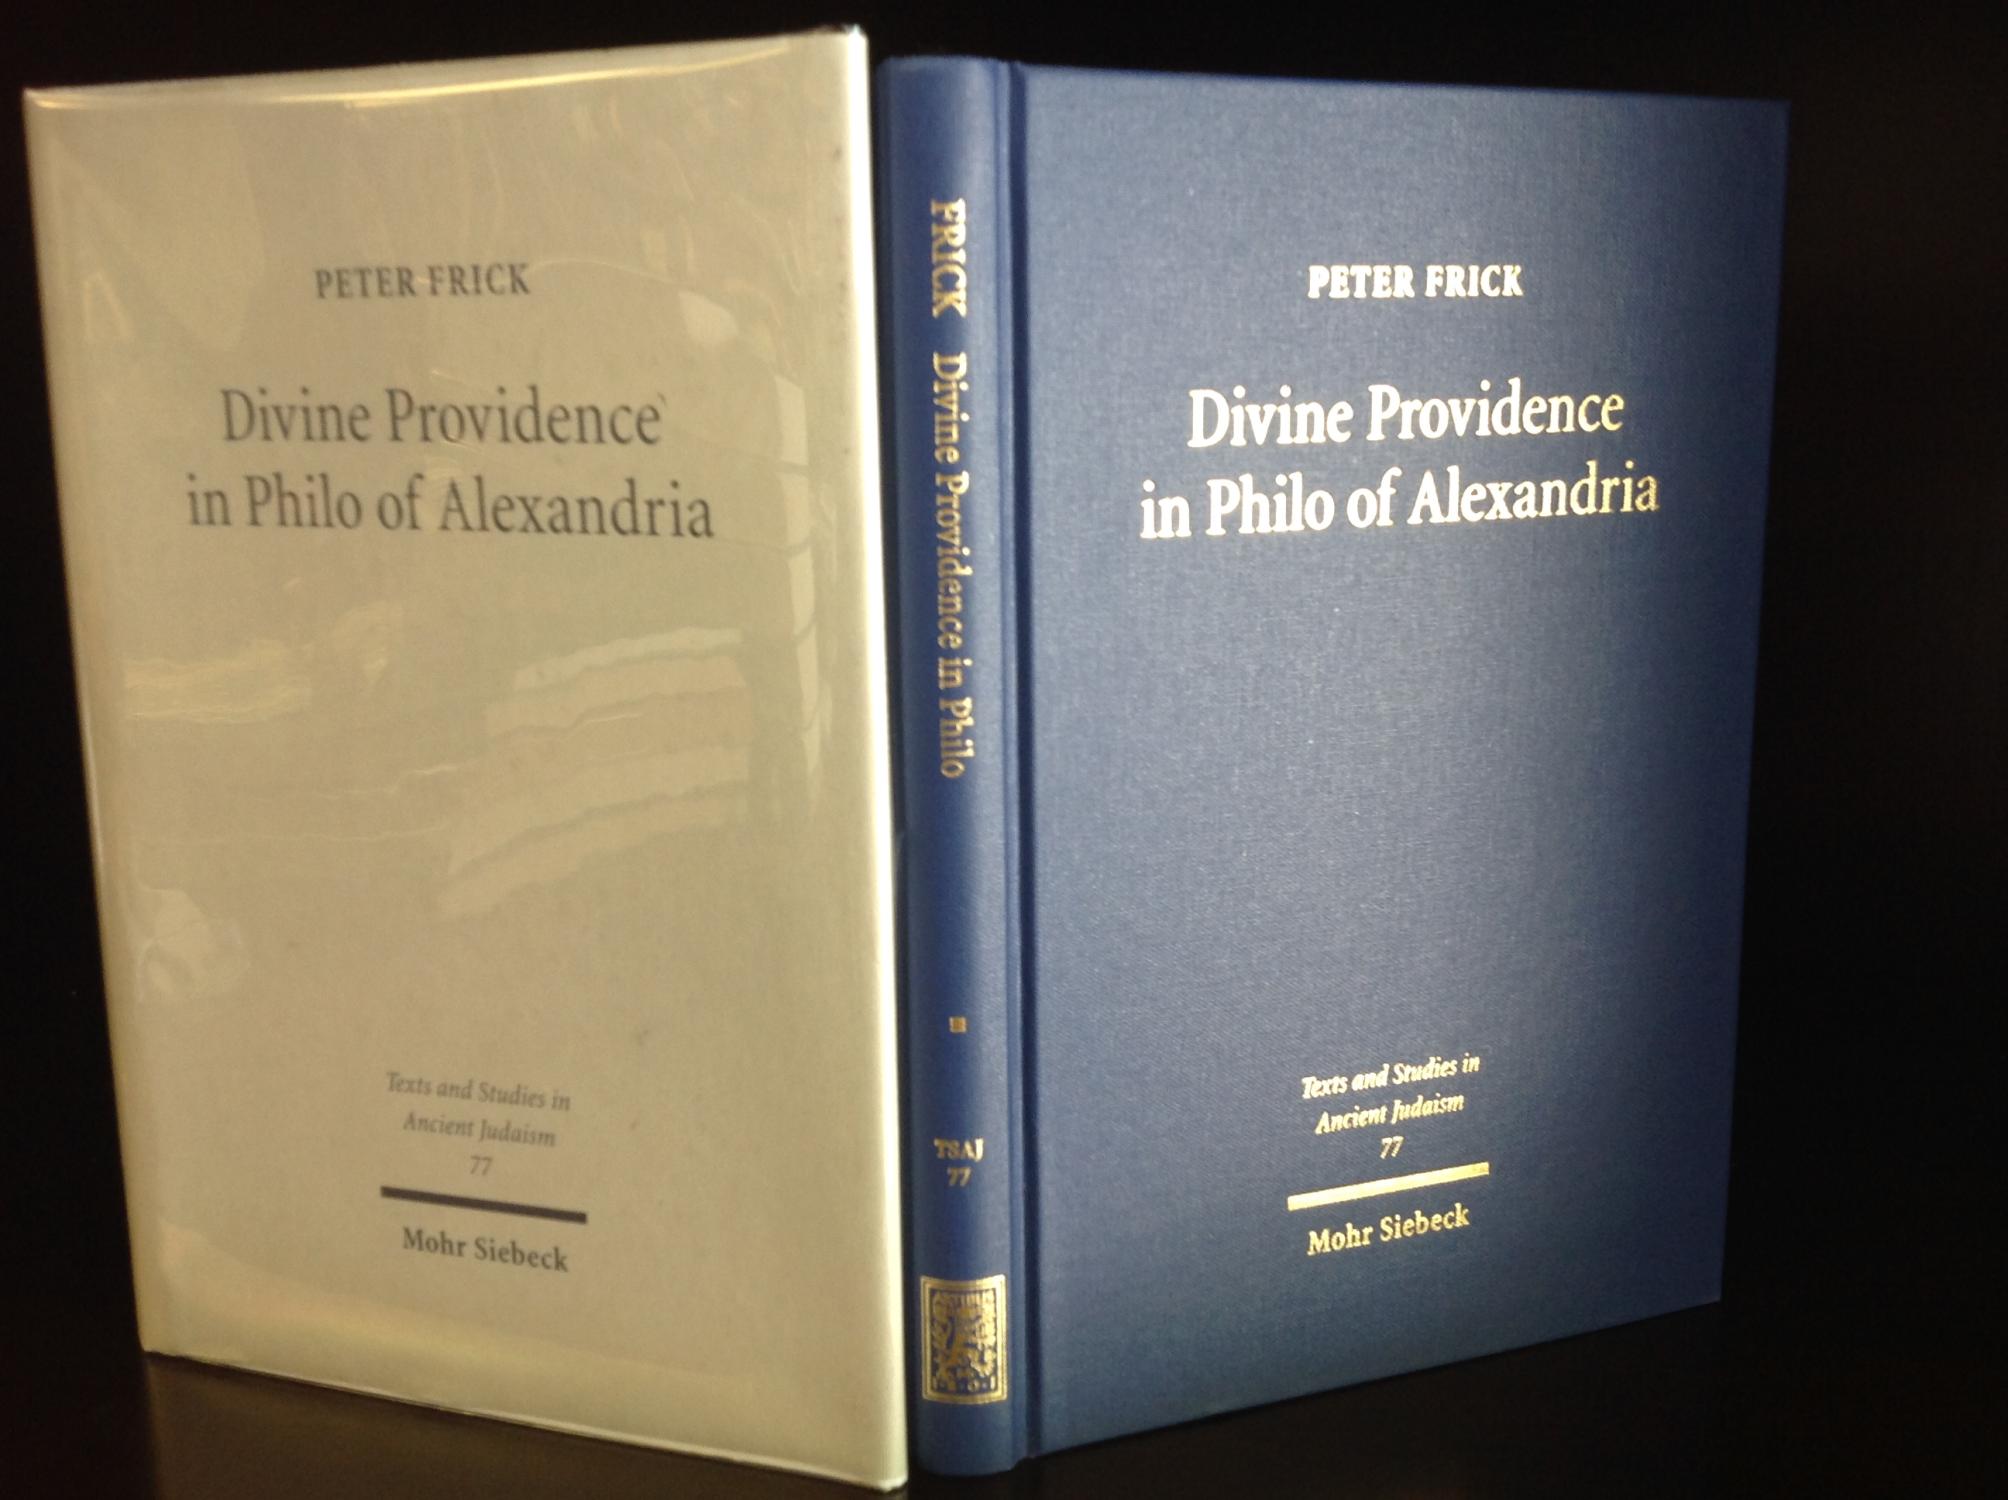 DIVINE PROVIDENCE IN PHILO OF ALEXANDRIA - Peter Frick